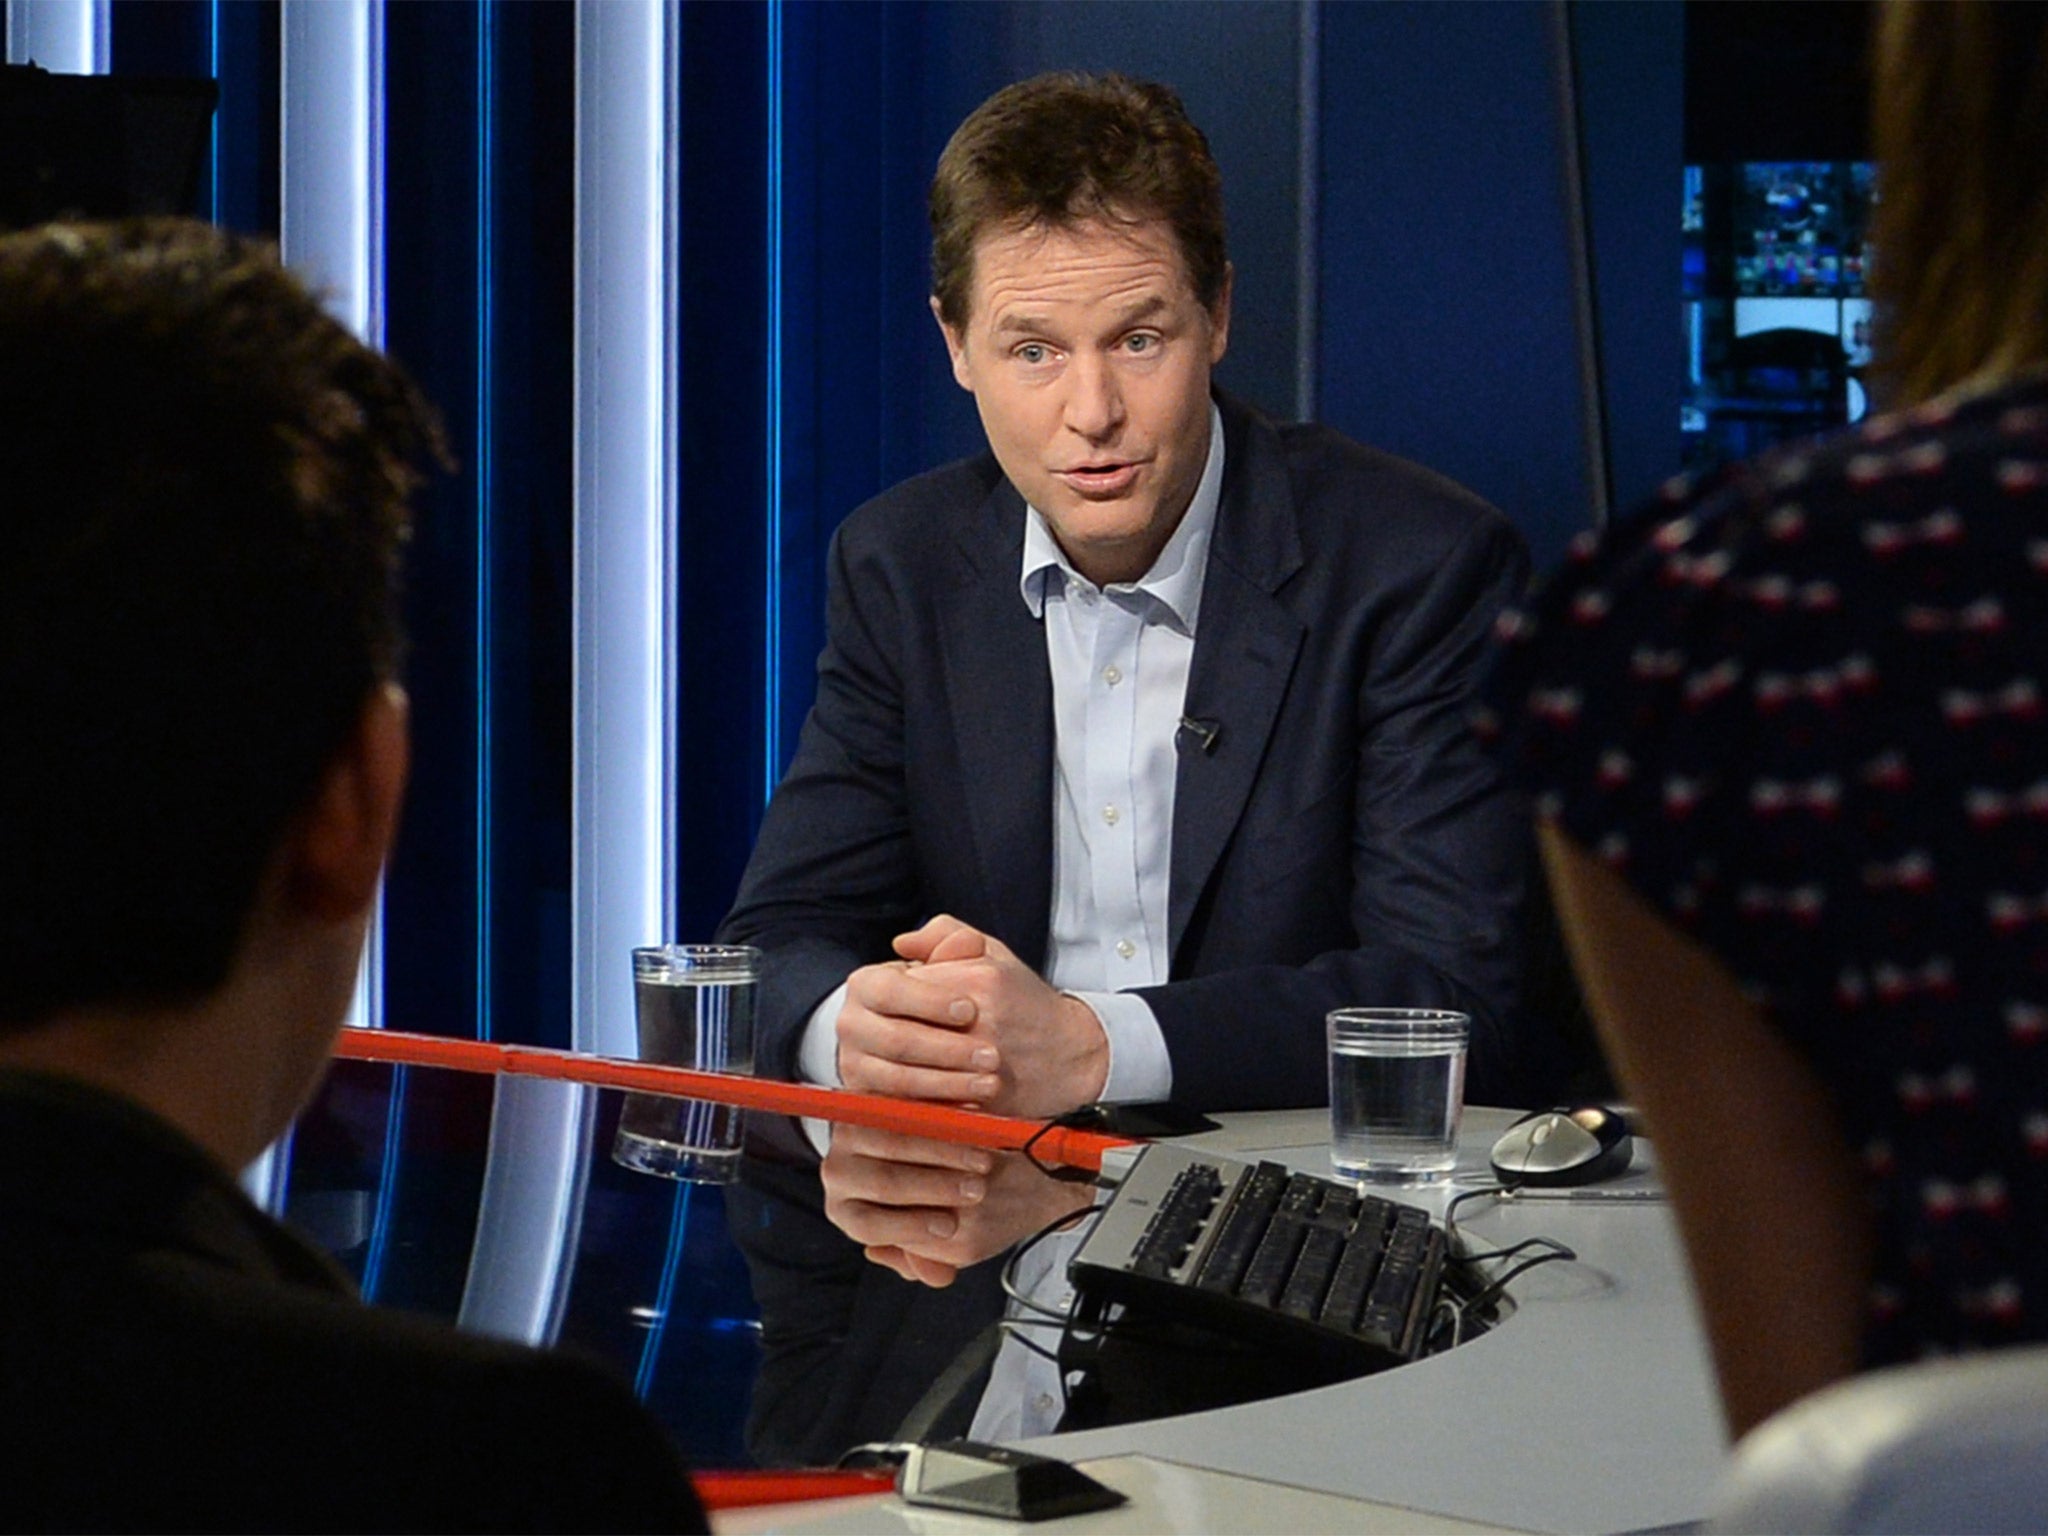 Nick Clegg is interviewed by children’s newspaper ‘First News’ as part of the Sky News Stand Up Be Counted campaign, on Wednesday